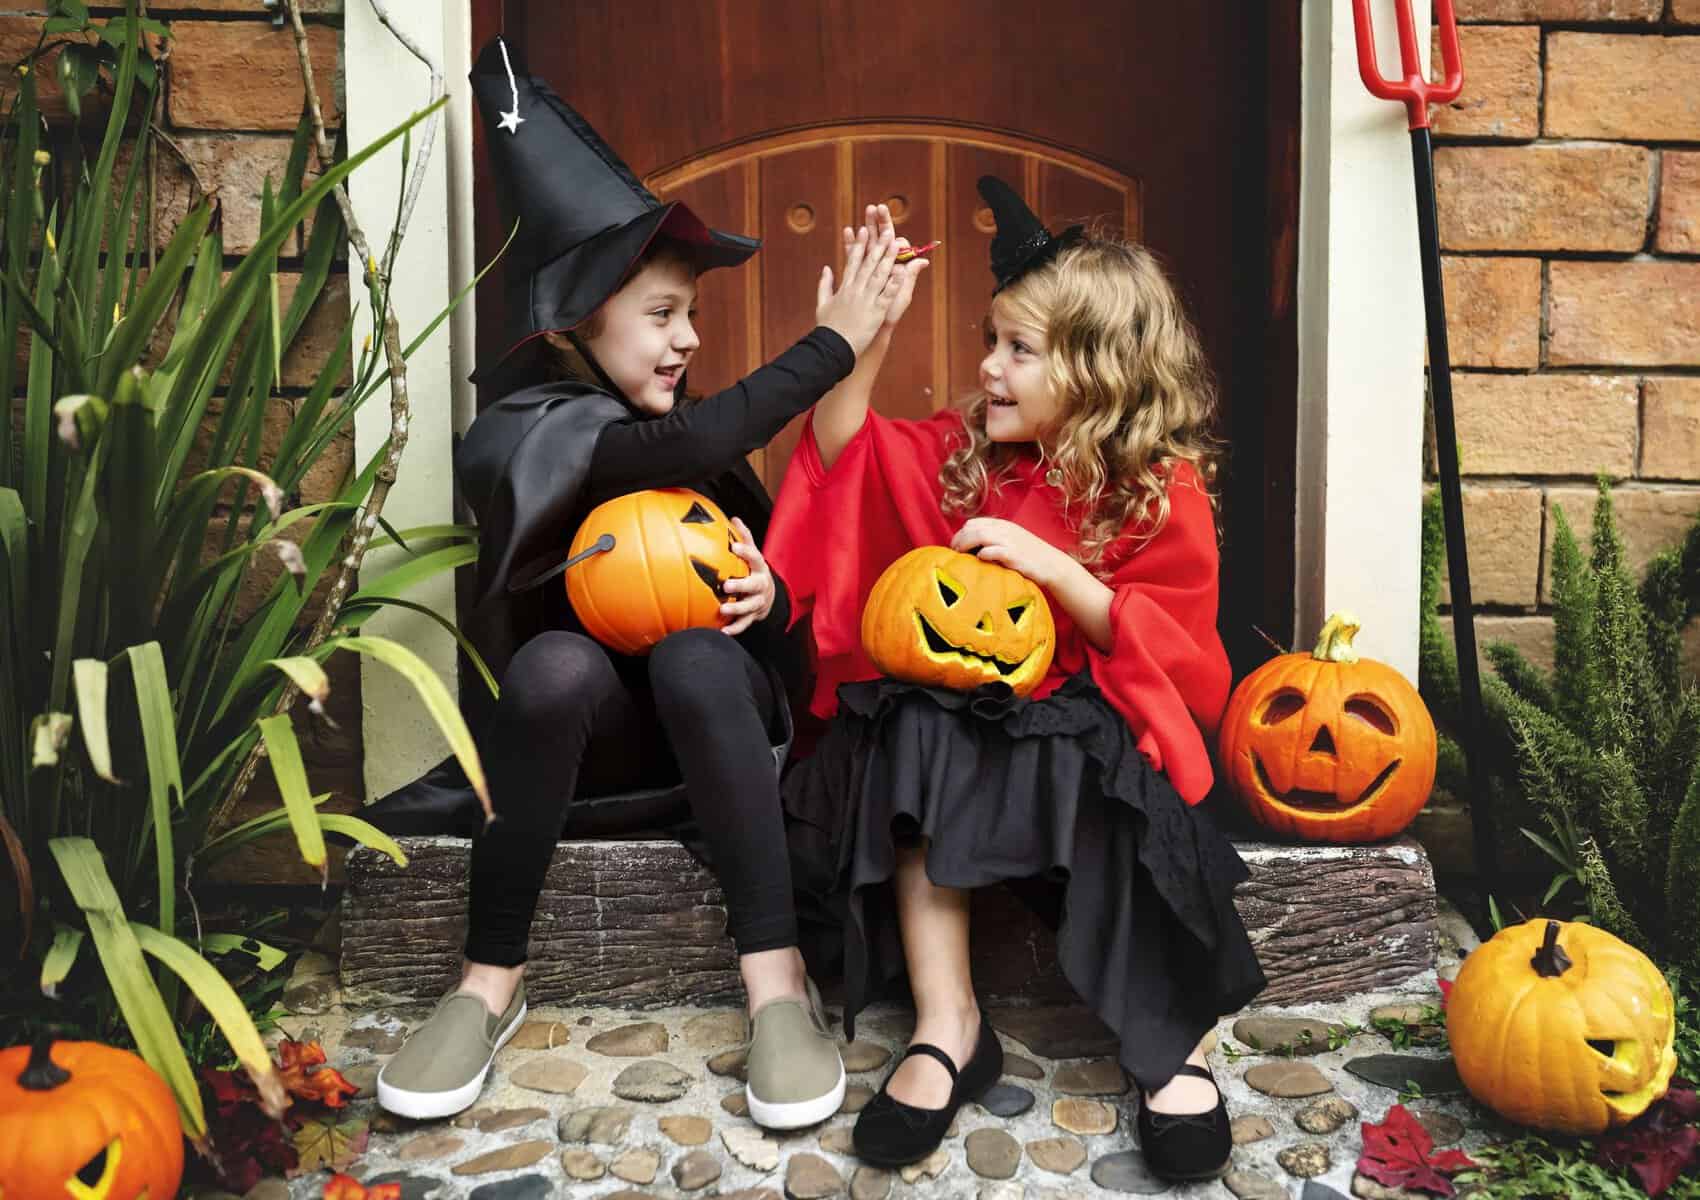 Chic Costume Ideas What is the most common High-fashion Halloween costume for girls